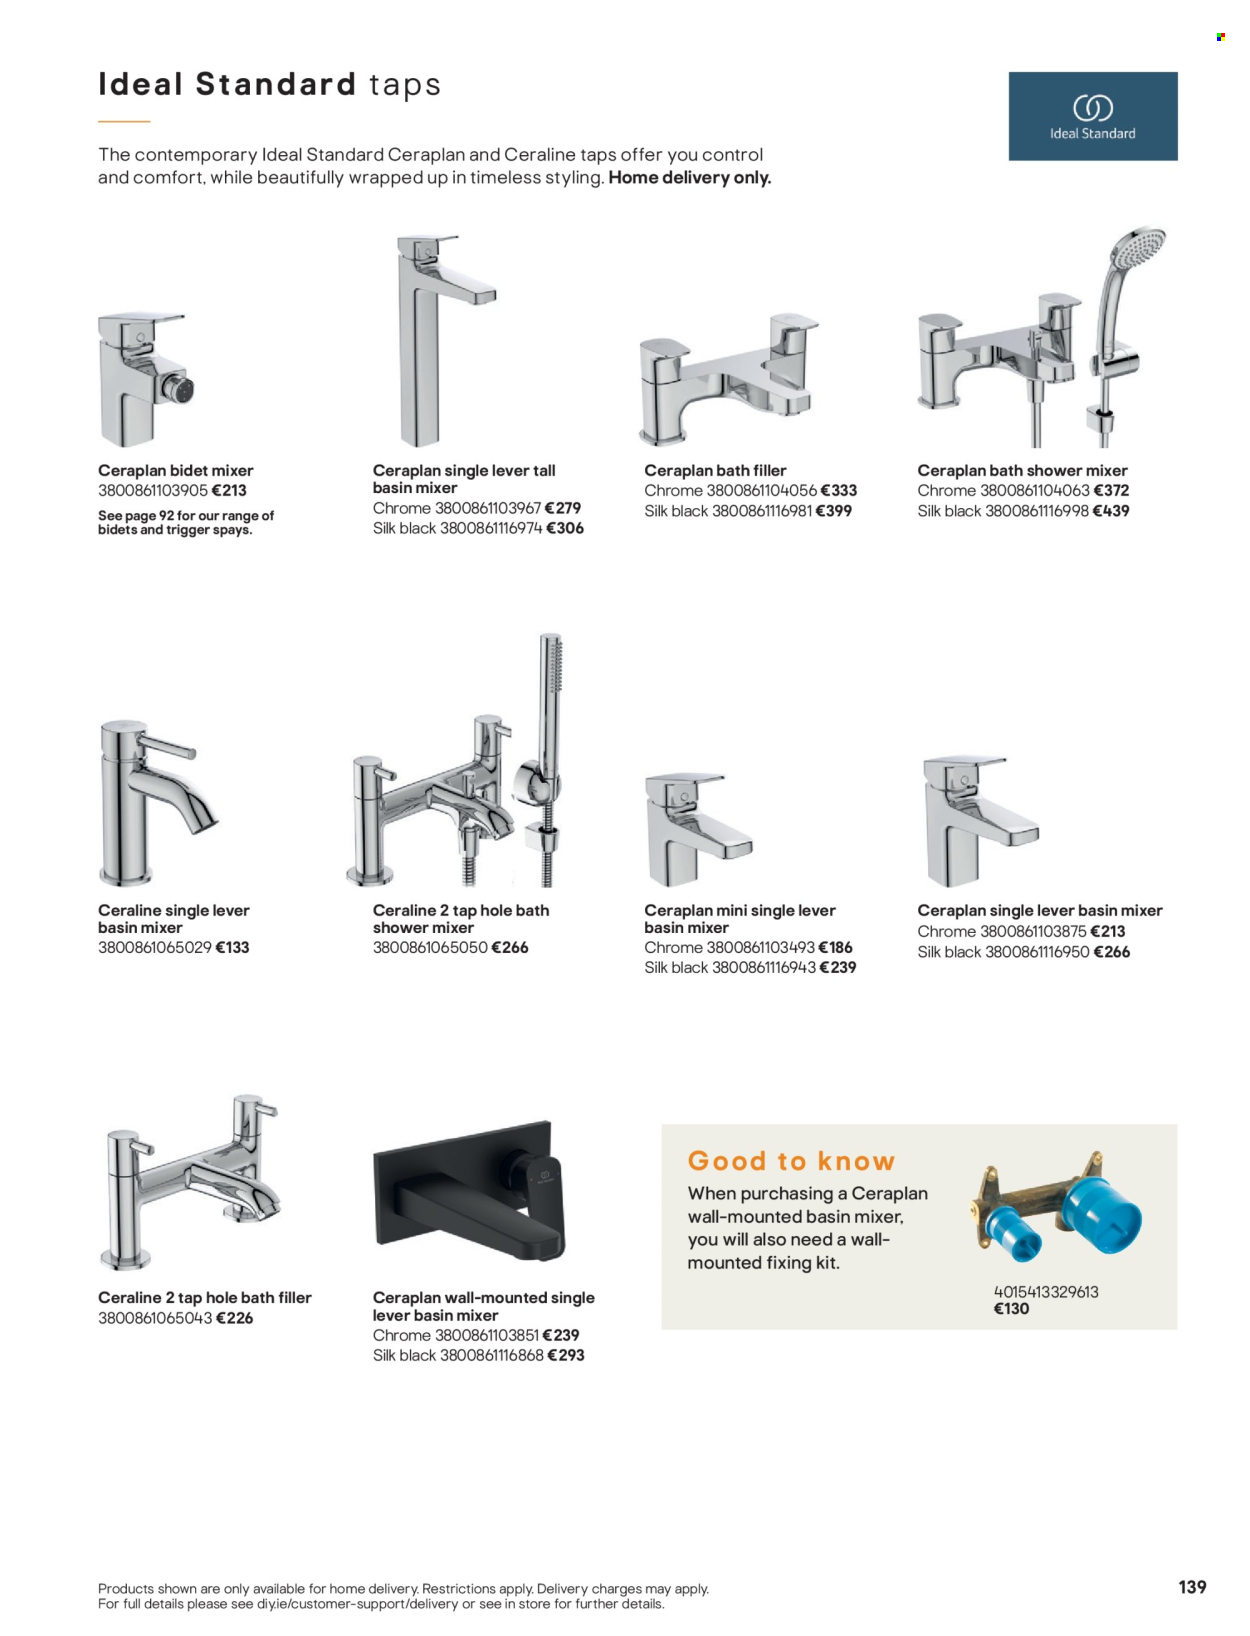 thumbnail - B&Q offer  - Sales products - shower mixer, basin mixer. Page 139.